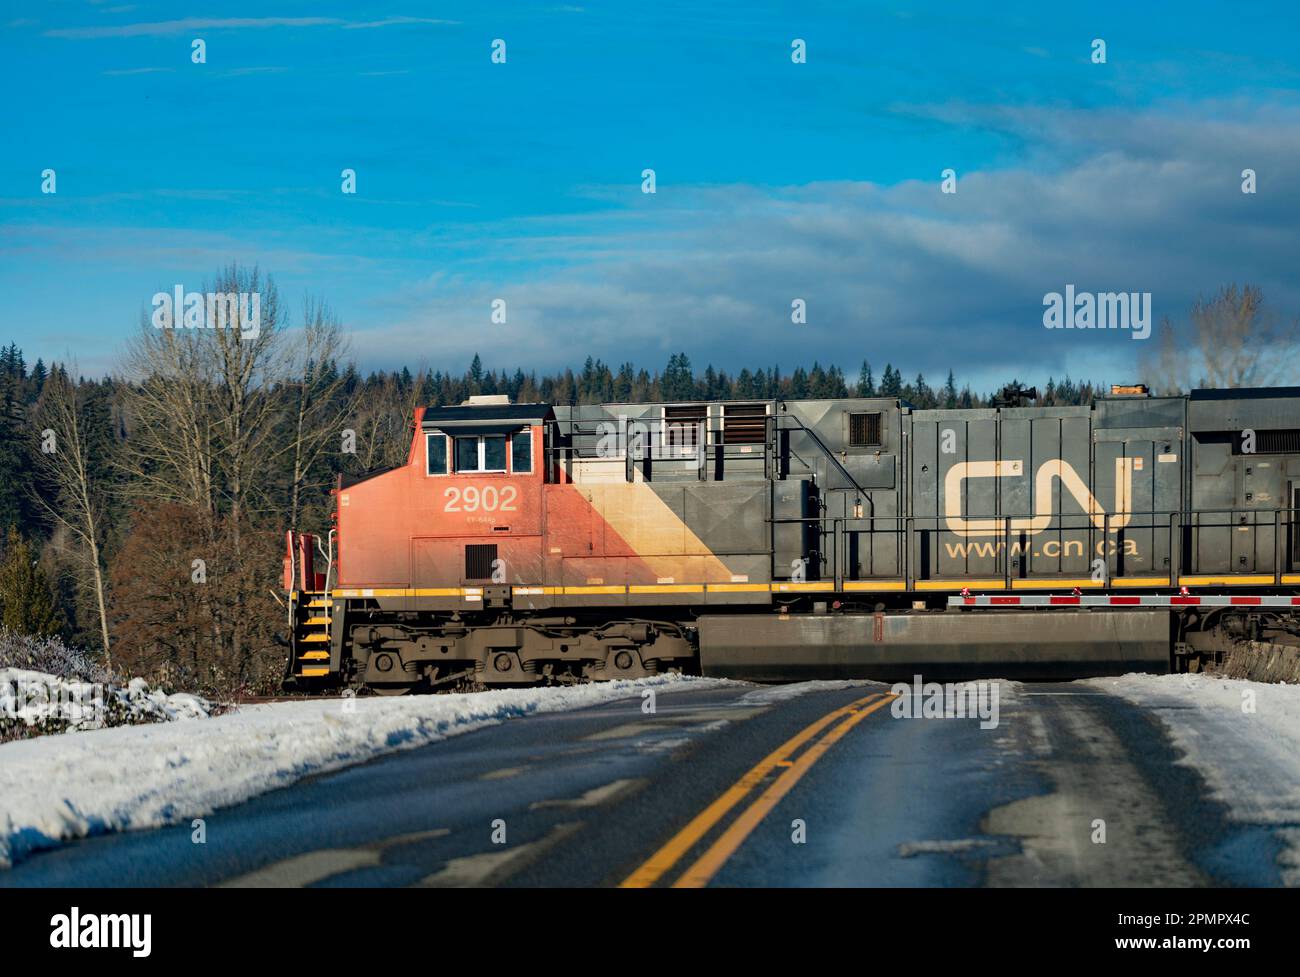 Canadian National Railway train engine on tracks over a road with snow on the roadside; Langley, British Columbia, Canada Stock Photo